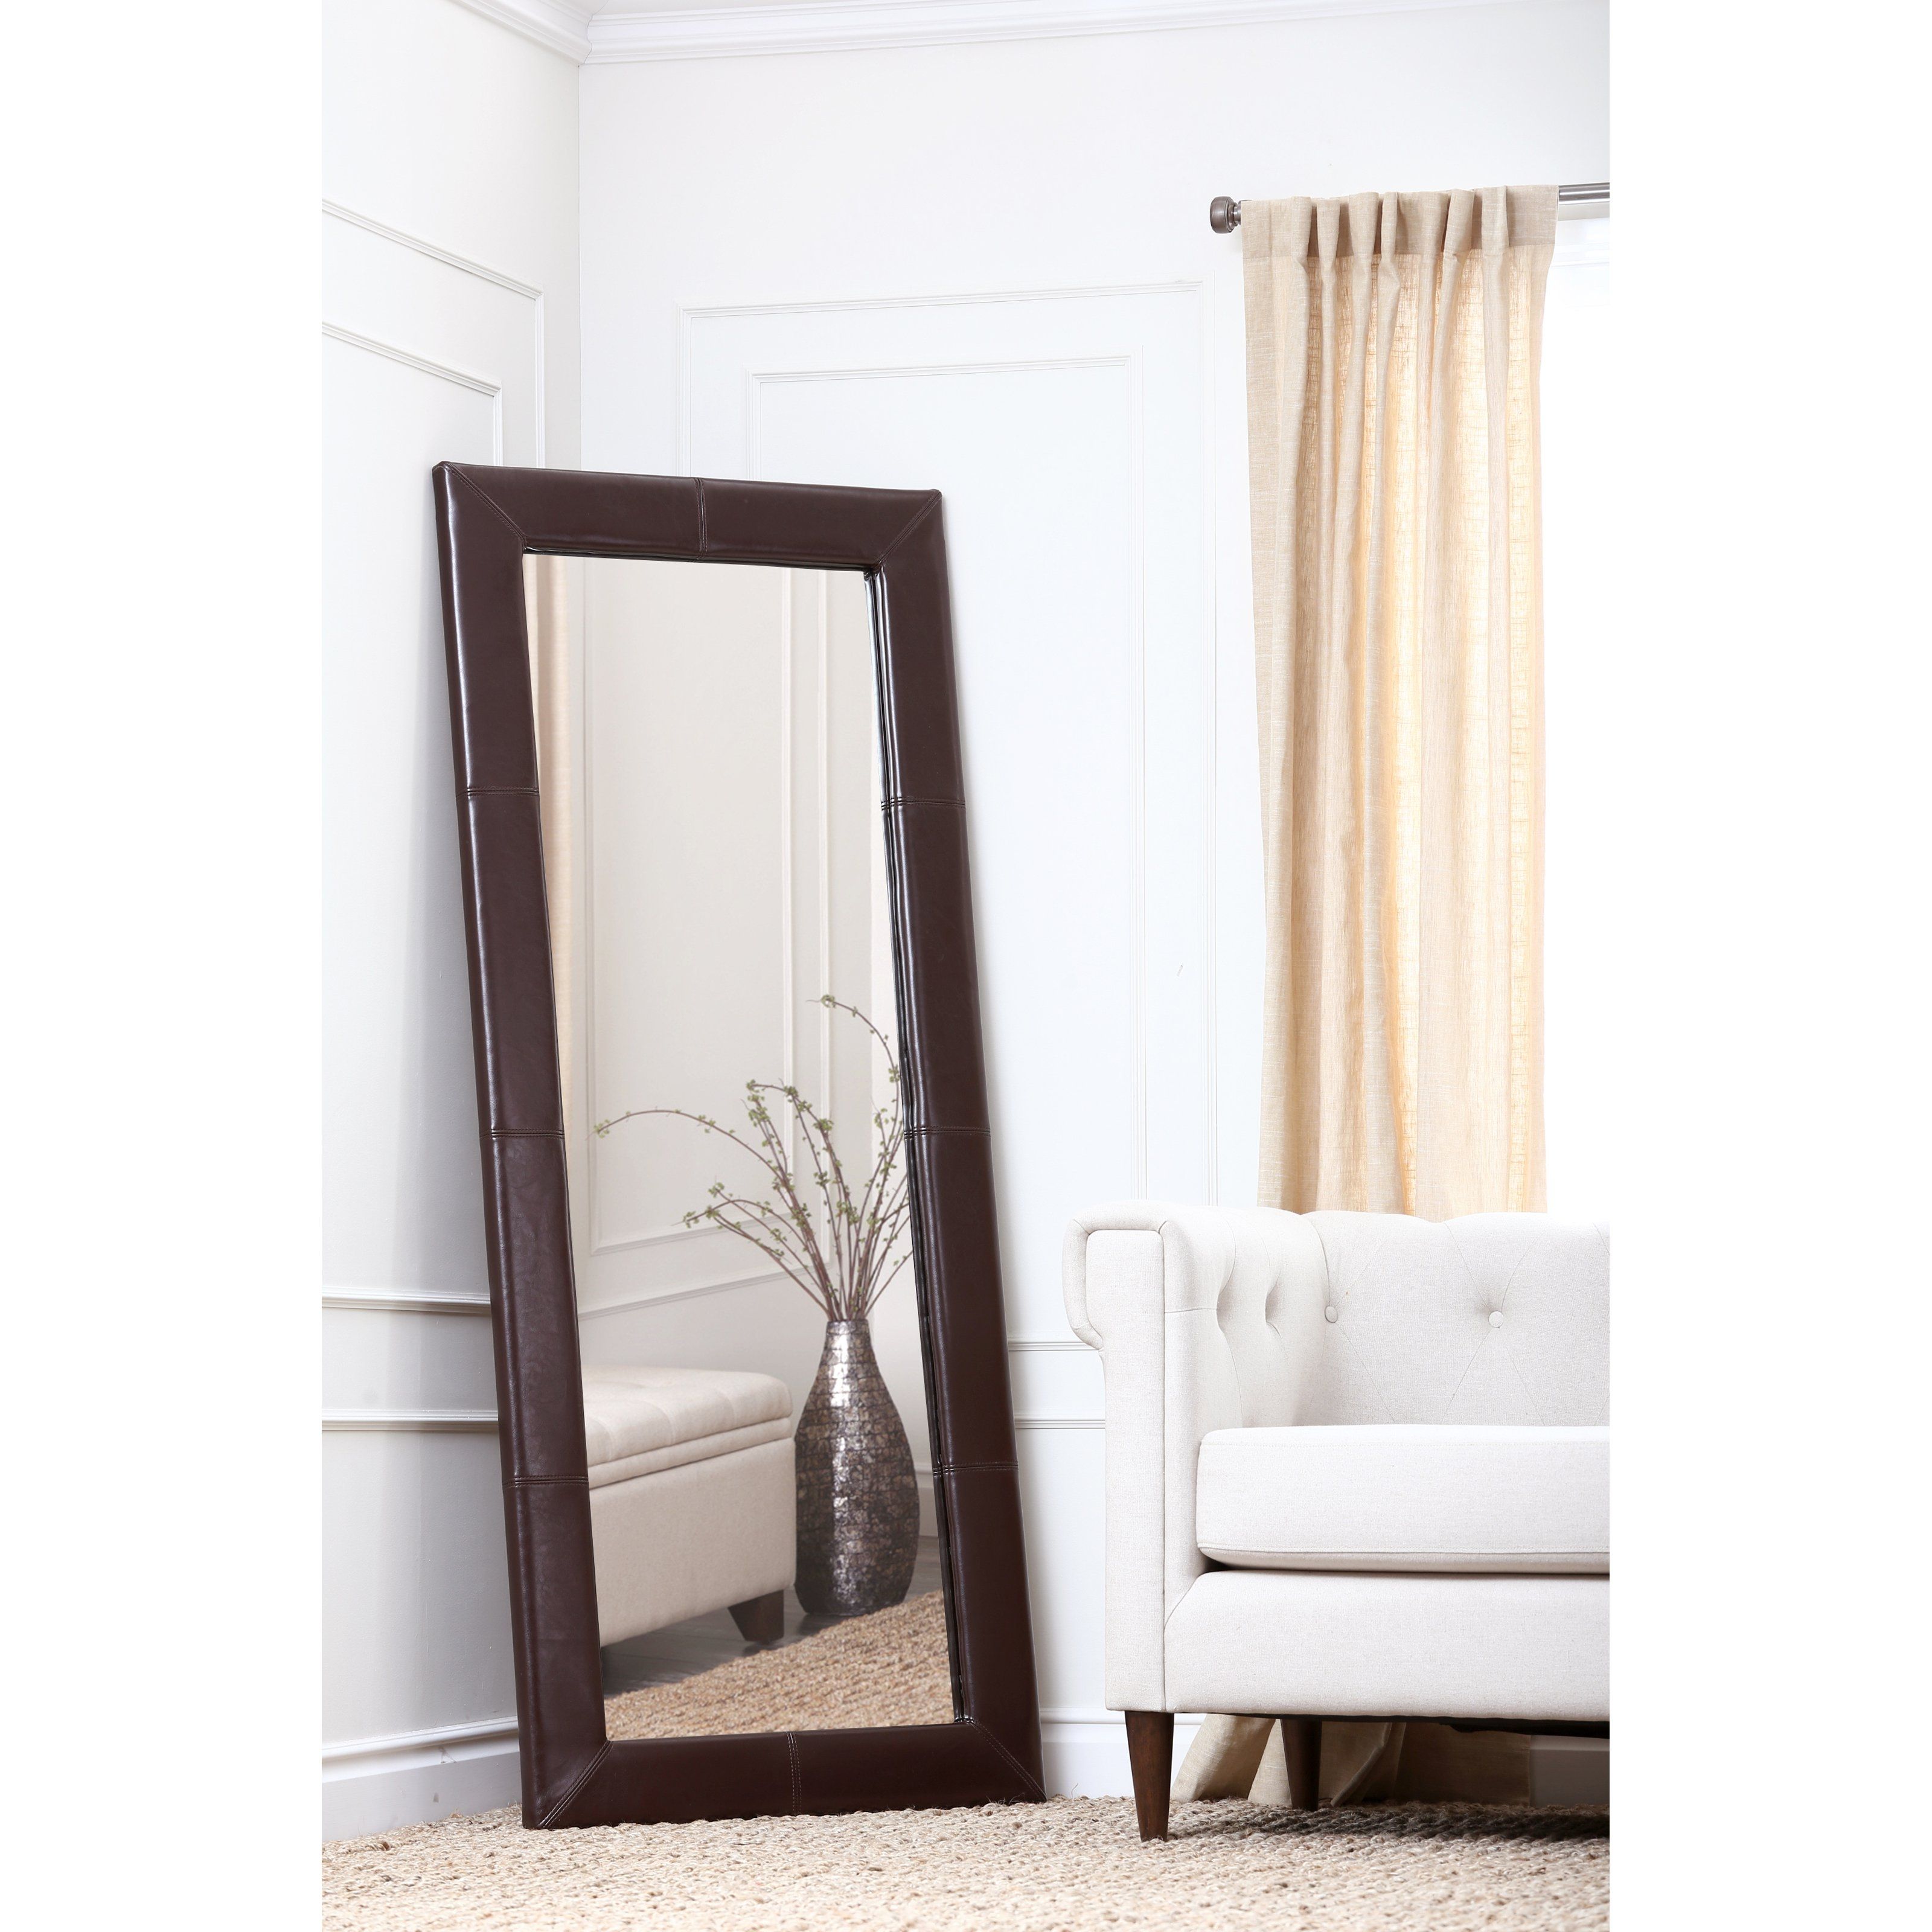 Silver Leaning Floor Mirror Harpsoundsco With Large Leather Mirror (View 2 of 15)